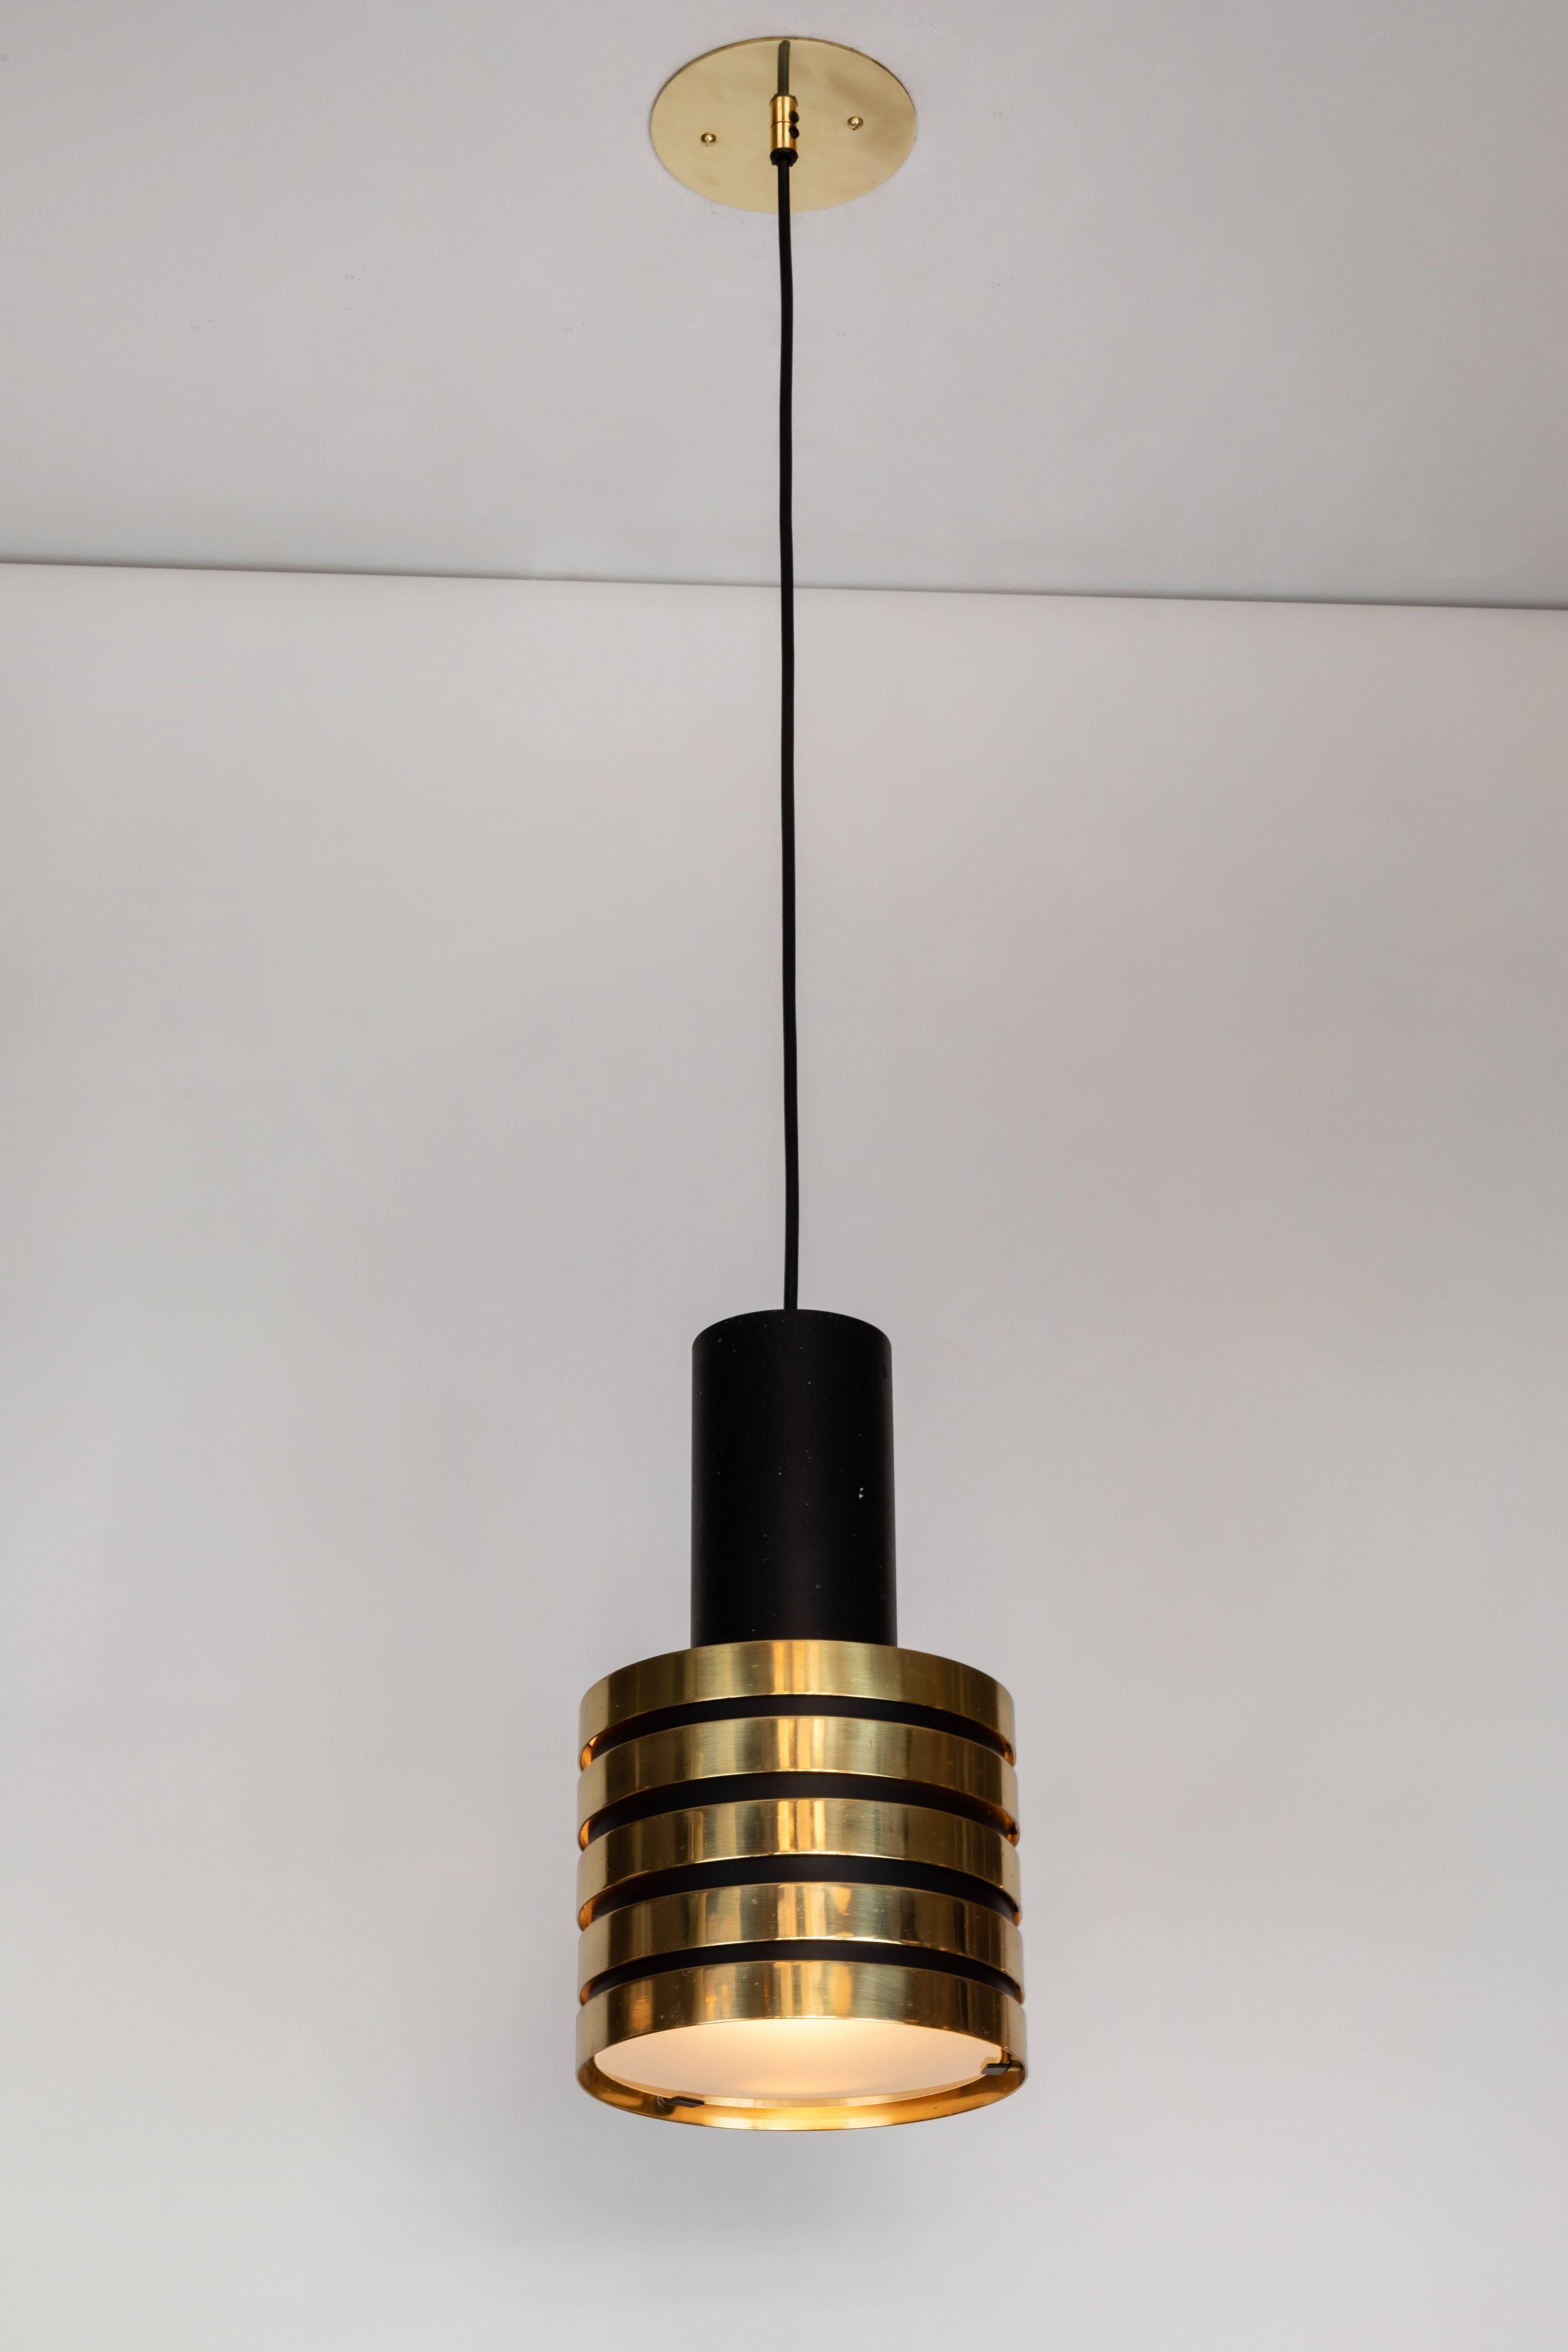 Scandinavian Modern 1950s Paavo Tynell K2-49 Brass and Glass Pendants for Taito Oy